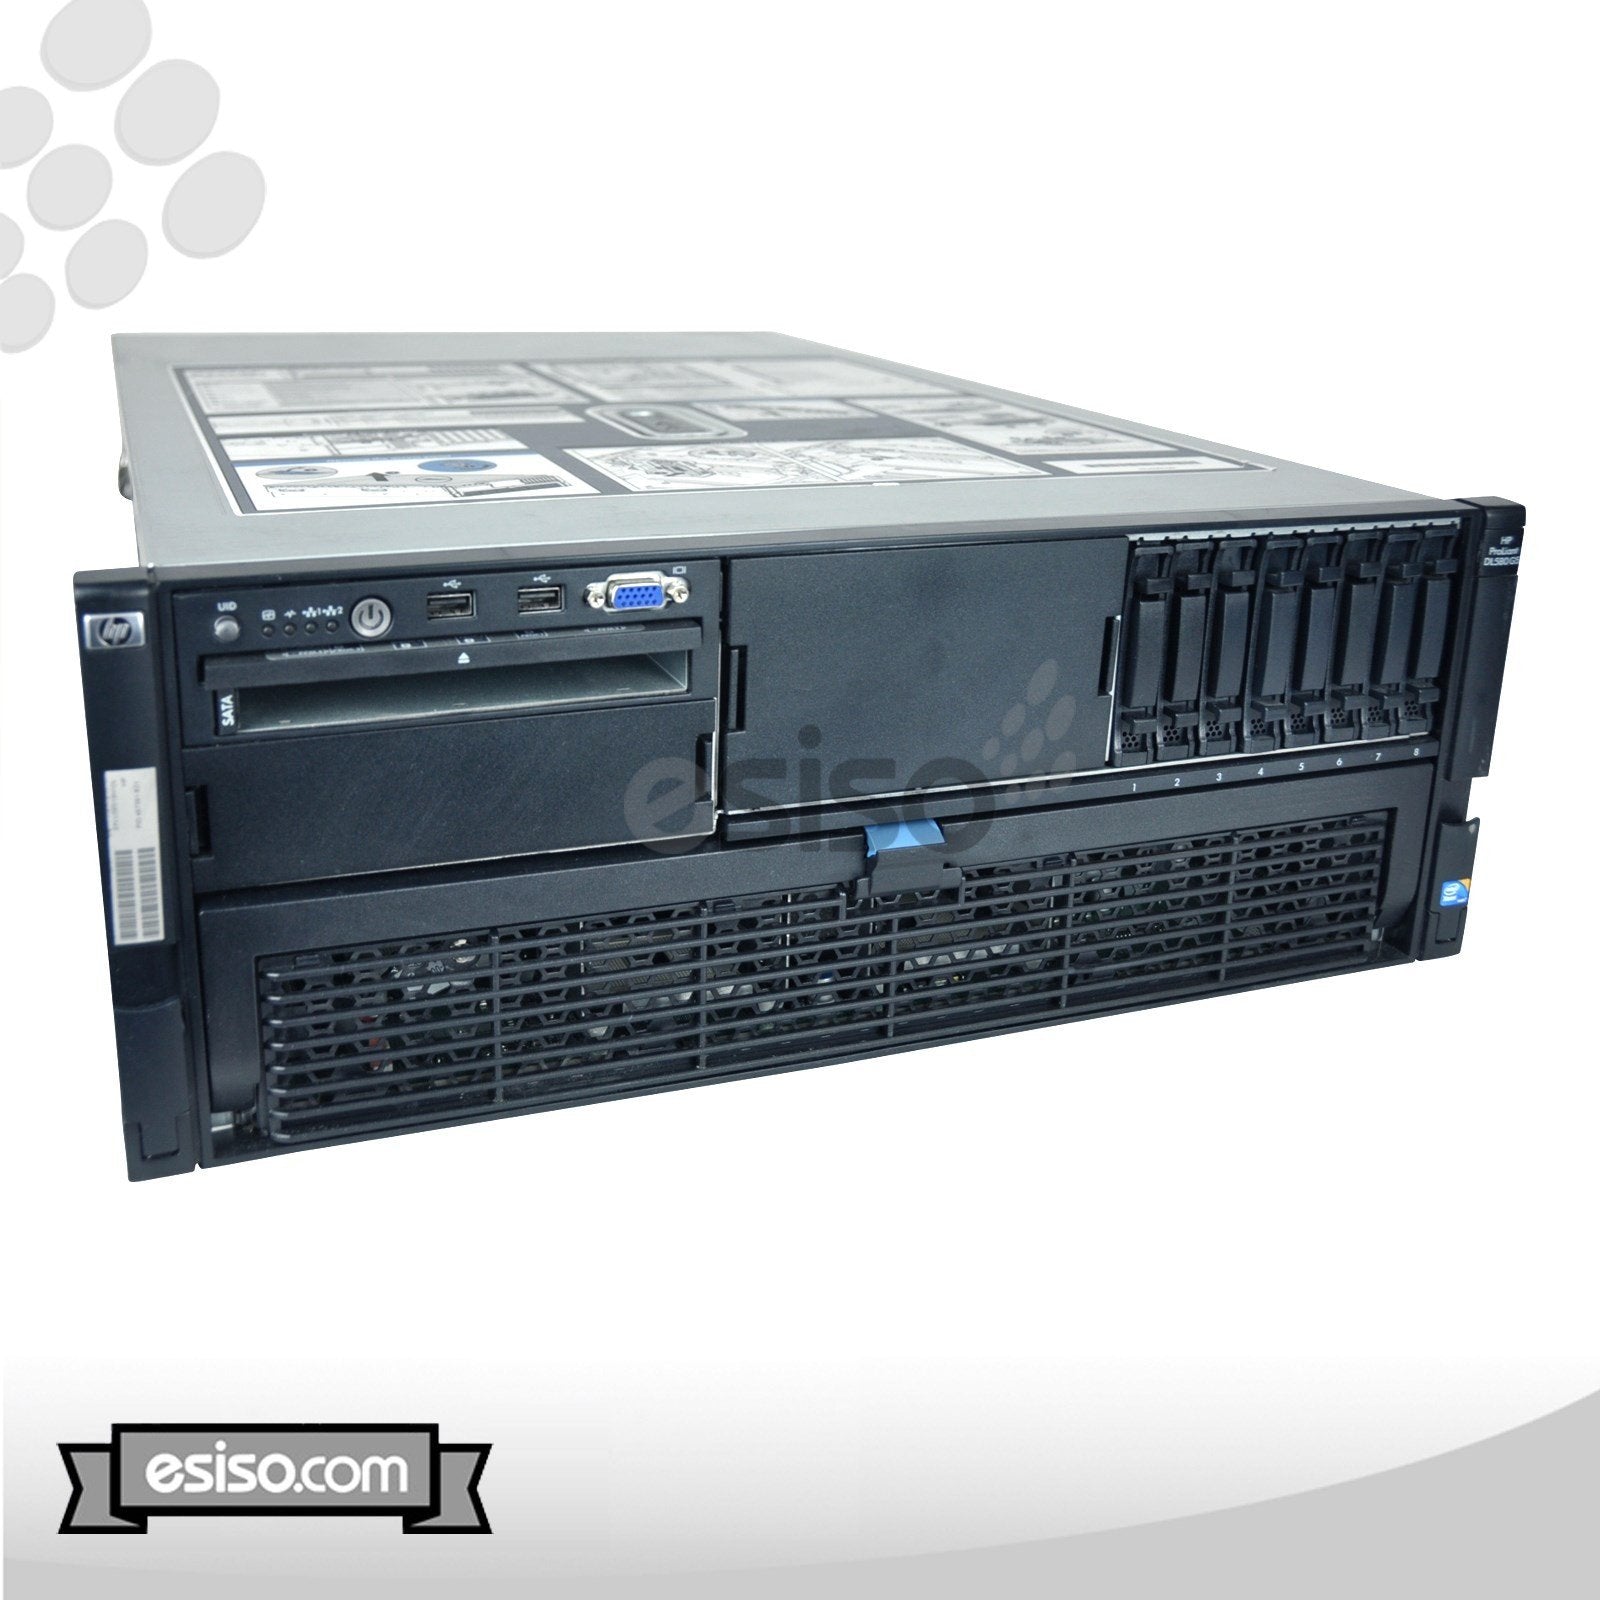 487381-B21 HP PROLIANT DL580 G5 CTO CHASSIS